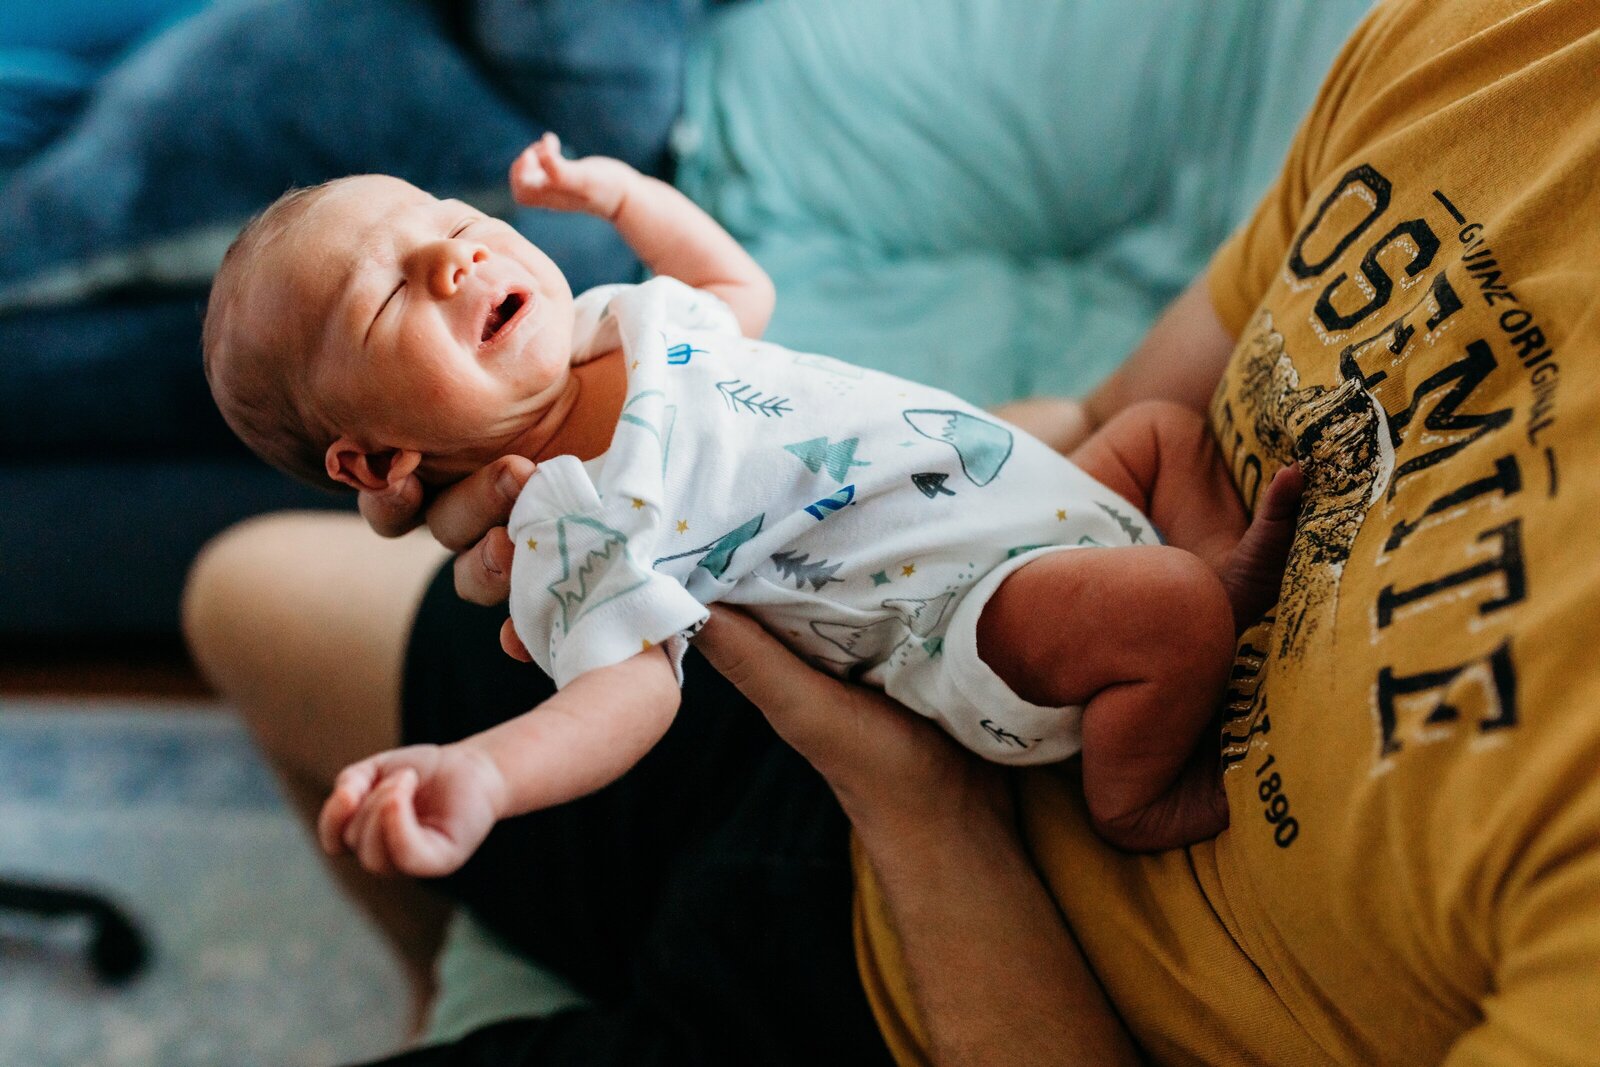 newborn baby in father's arms